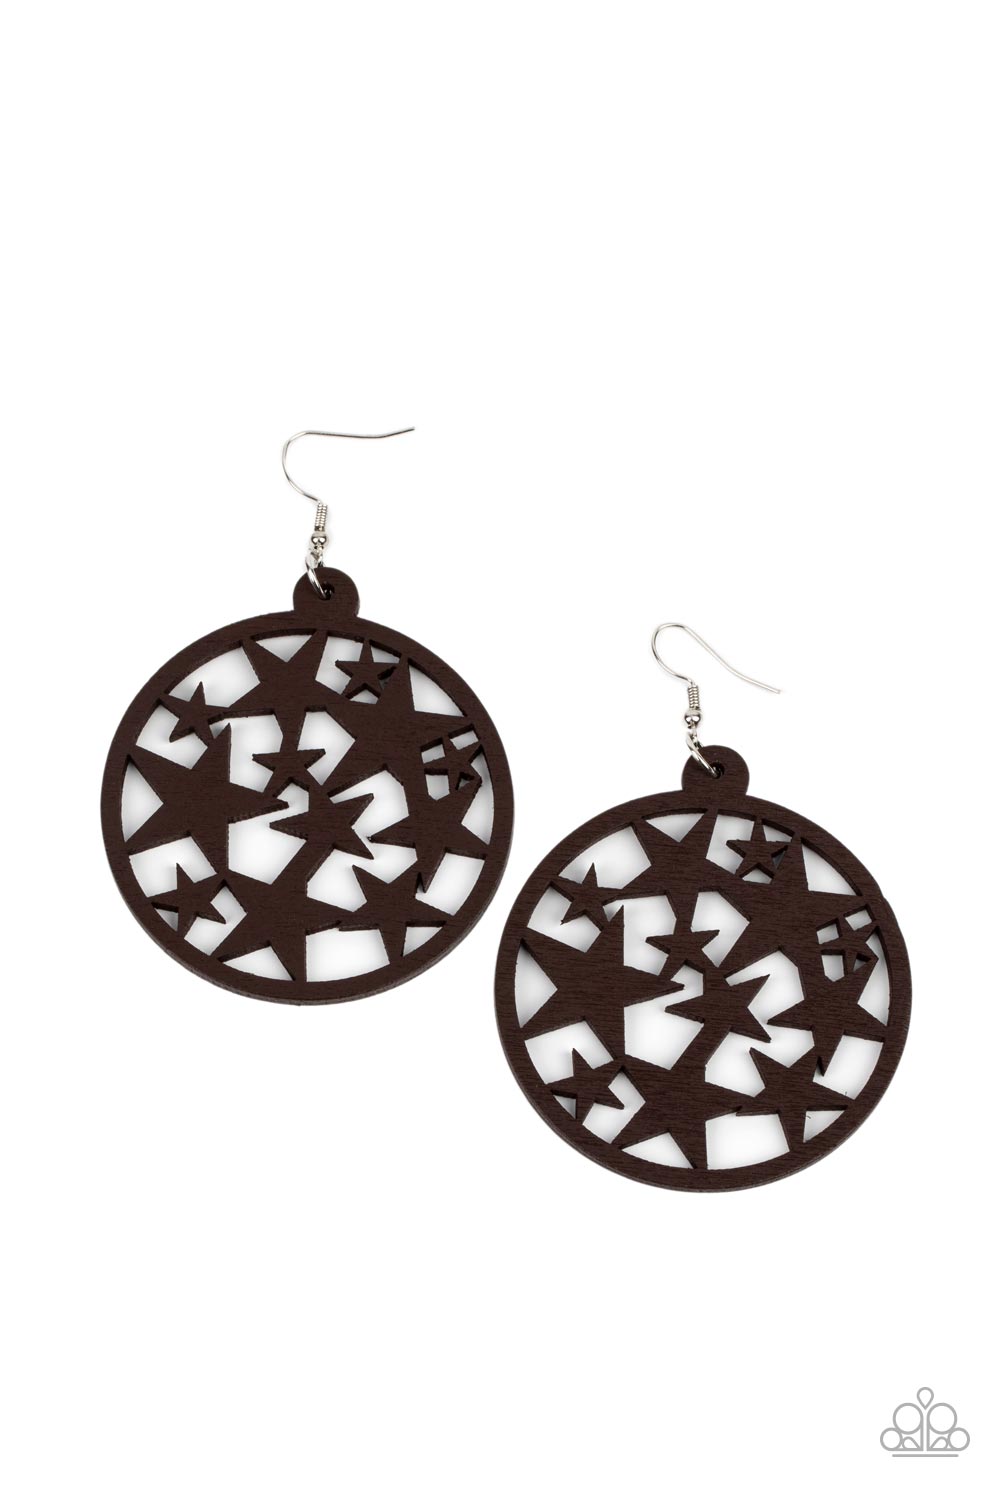 Cosmic Paradise Brown Wooden Earring - Paparazzi Accessories  An oversized round brown wooden frame is filled with a cosmos of cut-out brown stars creating a whimsical statement. Earring attaches to a standard fishhook fitting.  Sold as one pair of earrings.